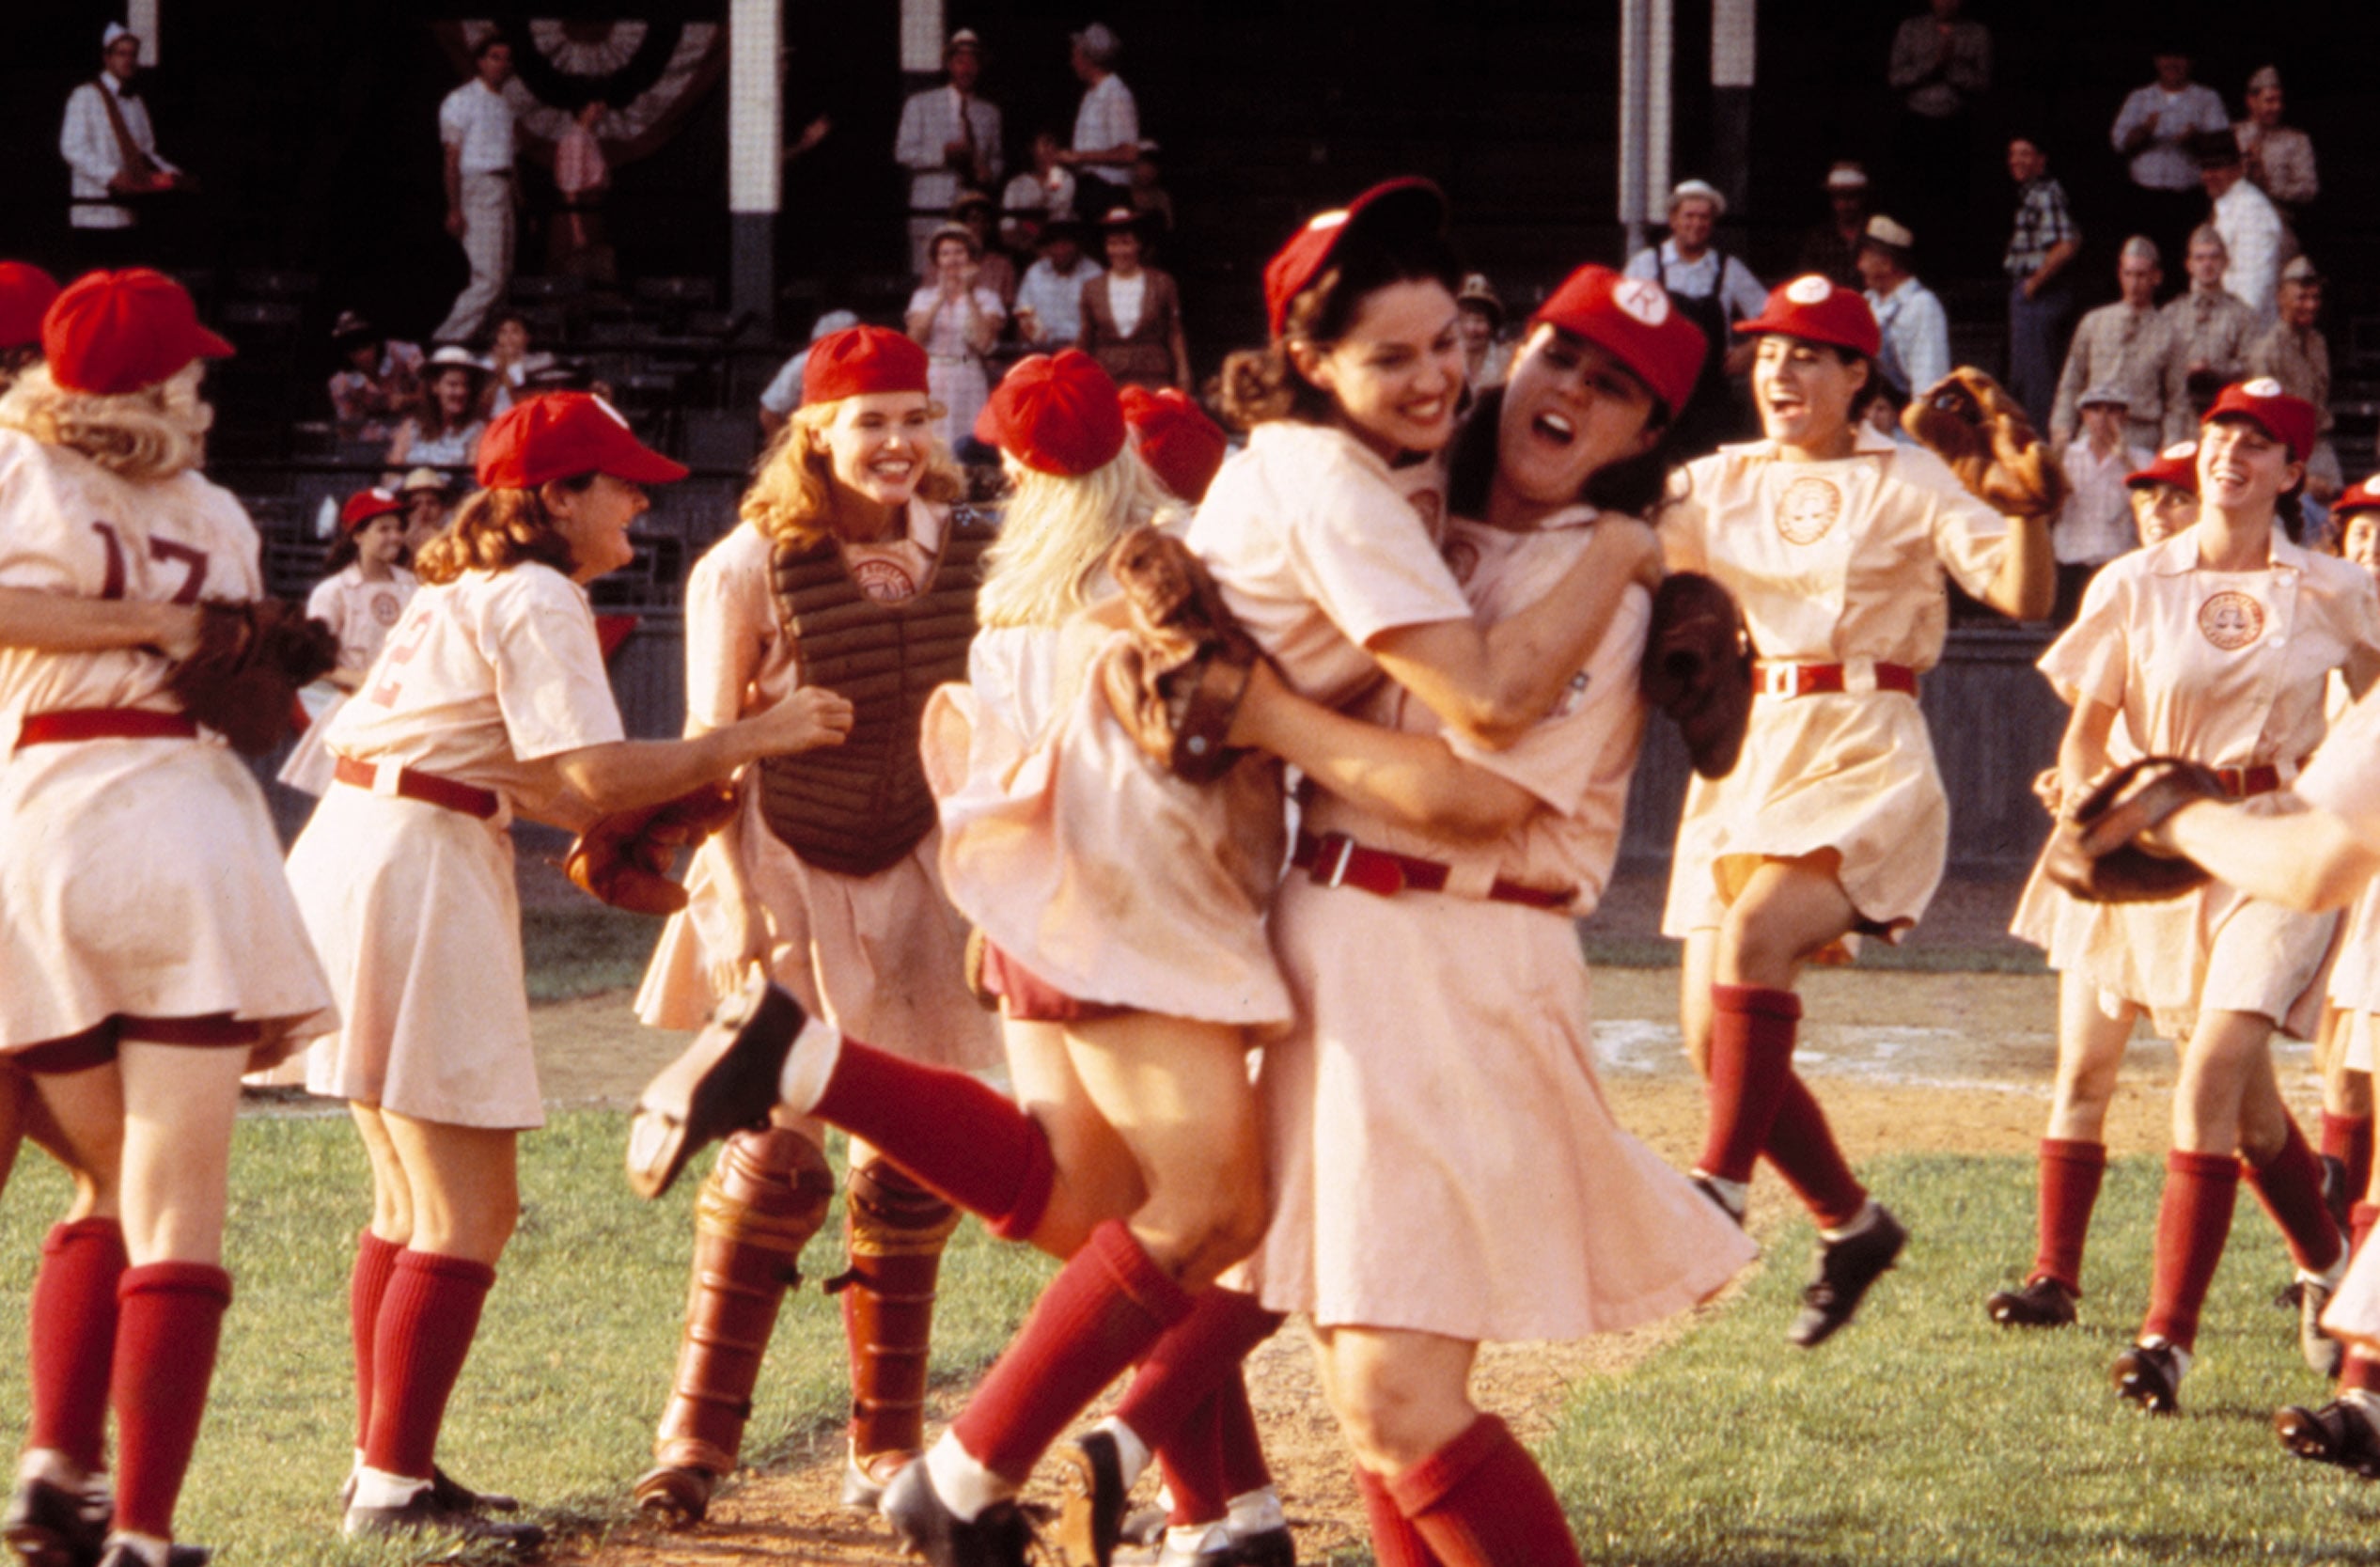 City of Rockford Peaches A League of Their Own Movie Adult 